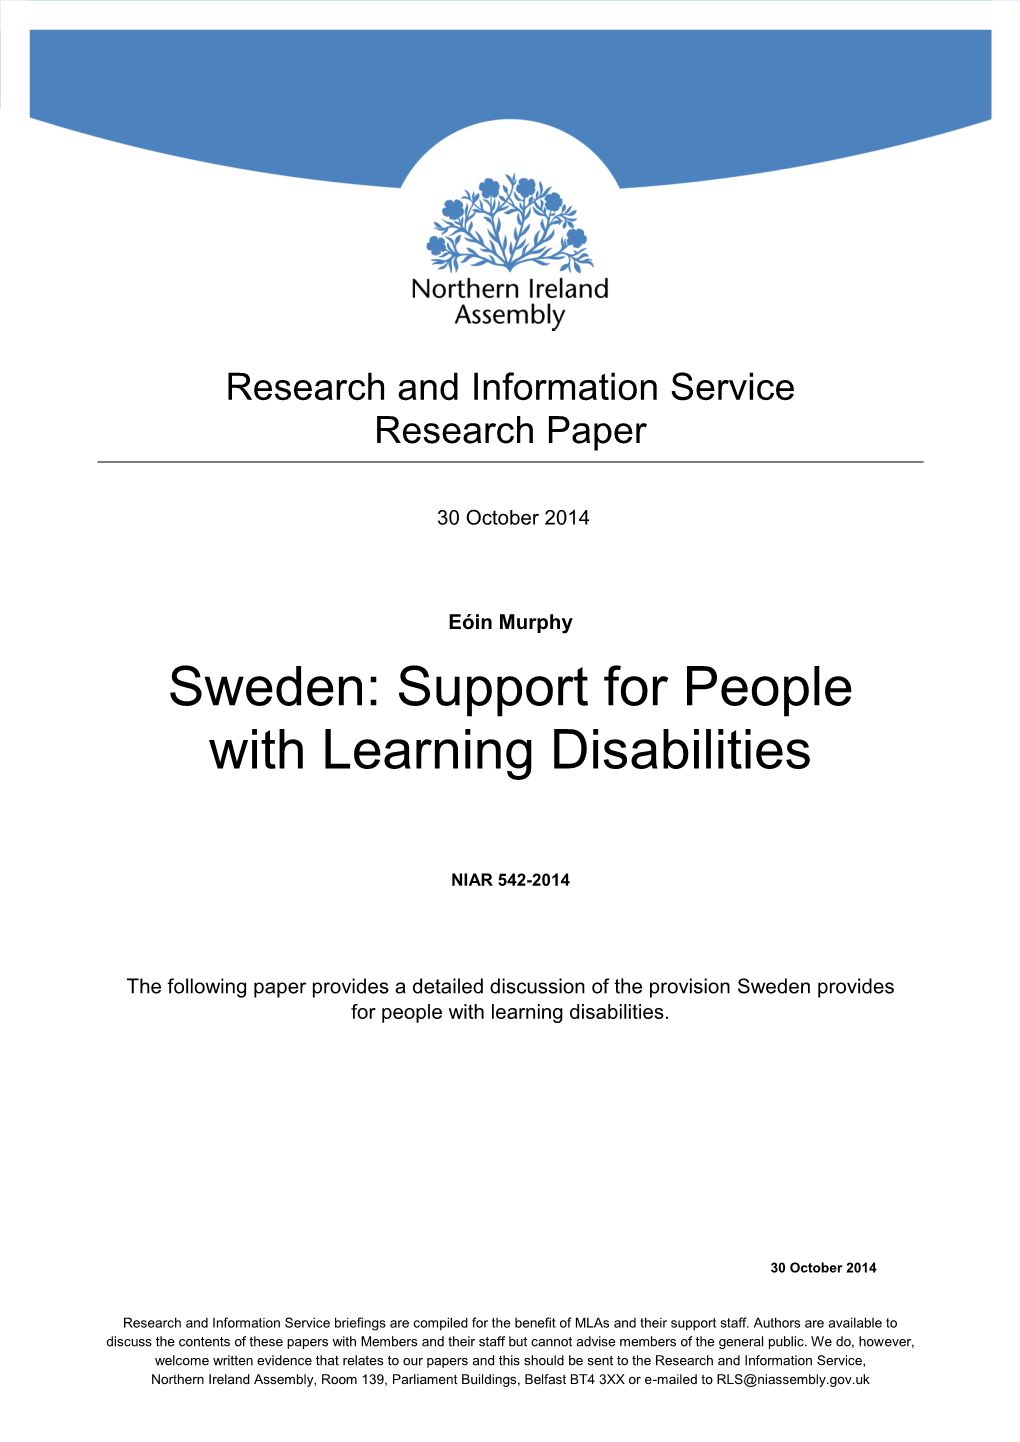 Sweden Support for People with Learning Disabilities